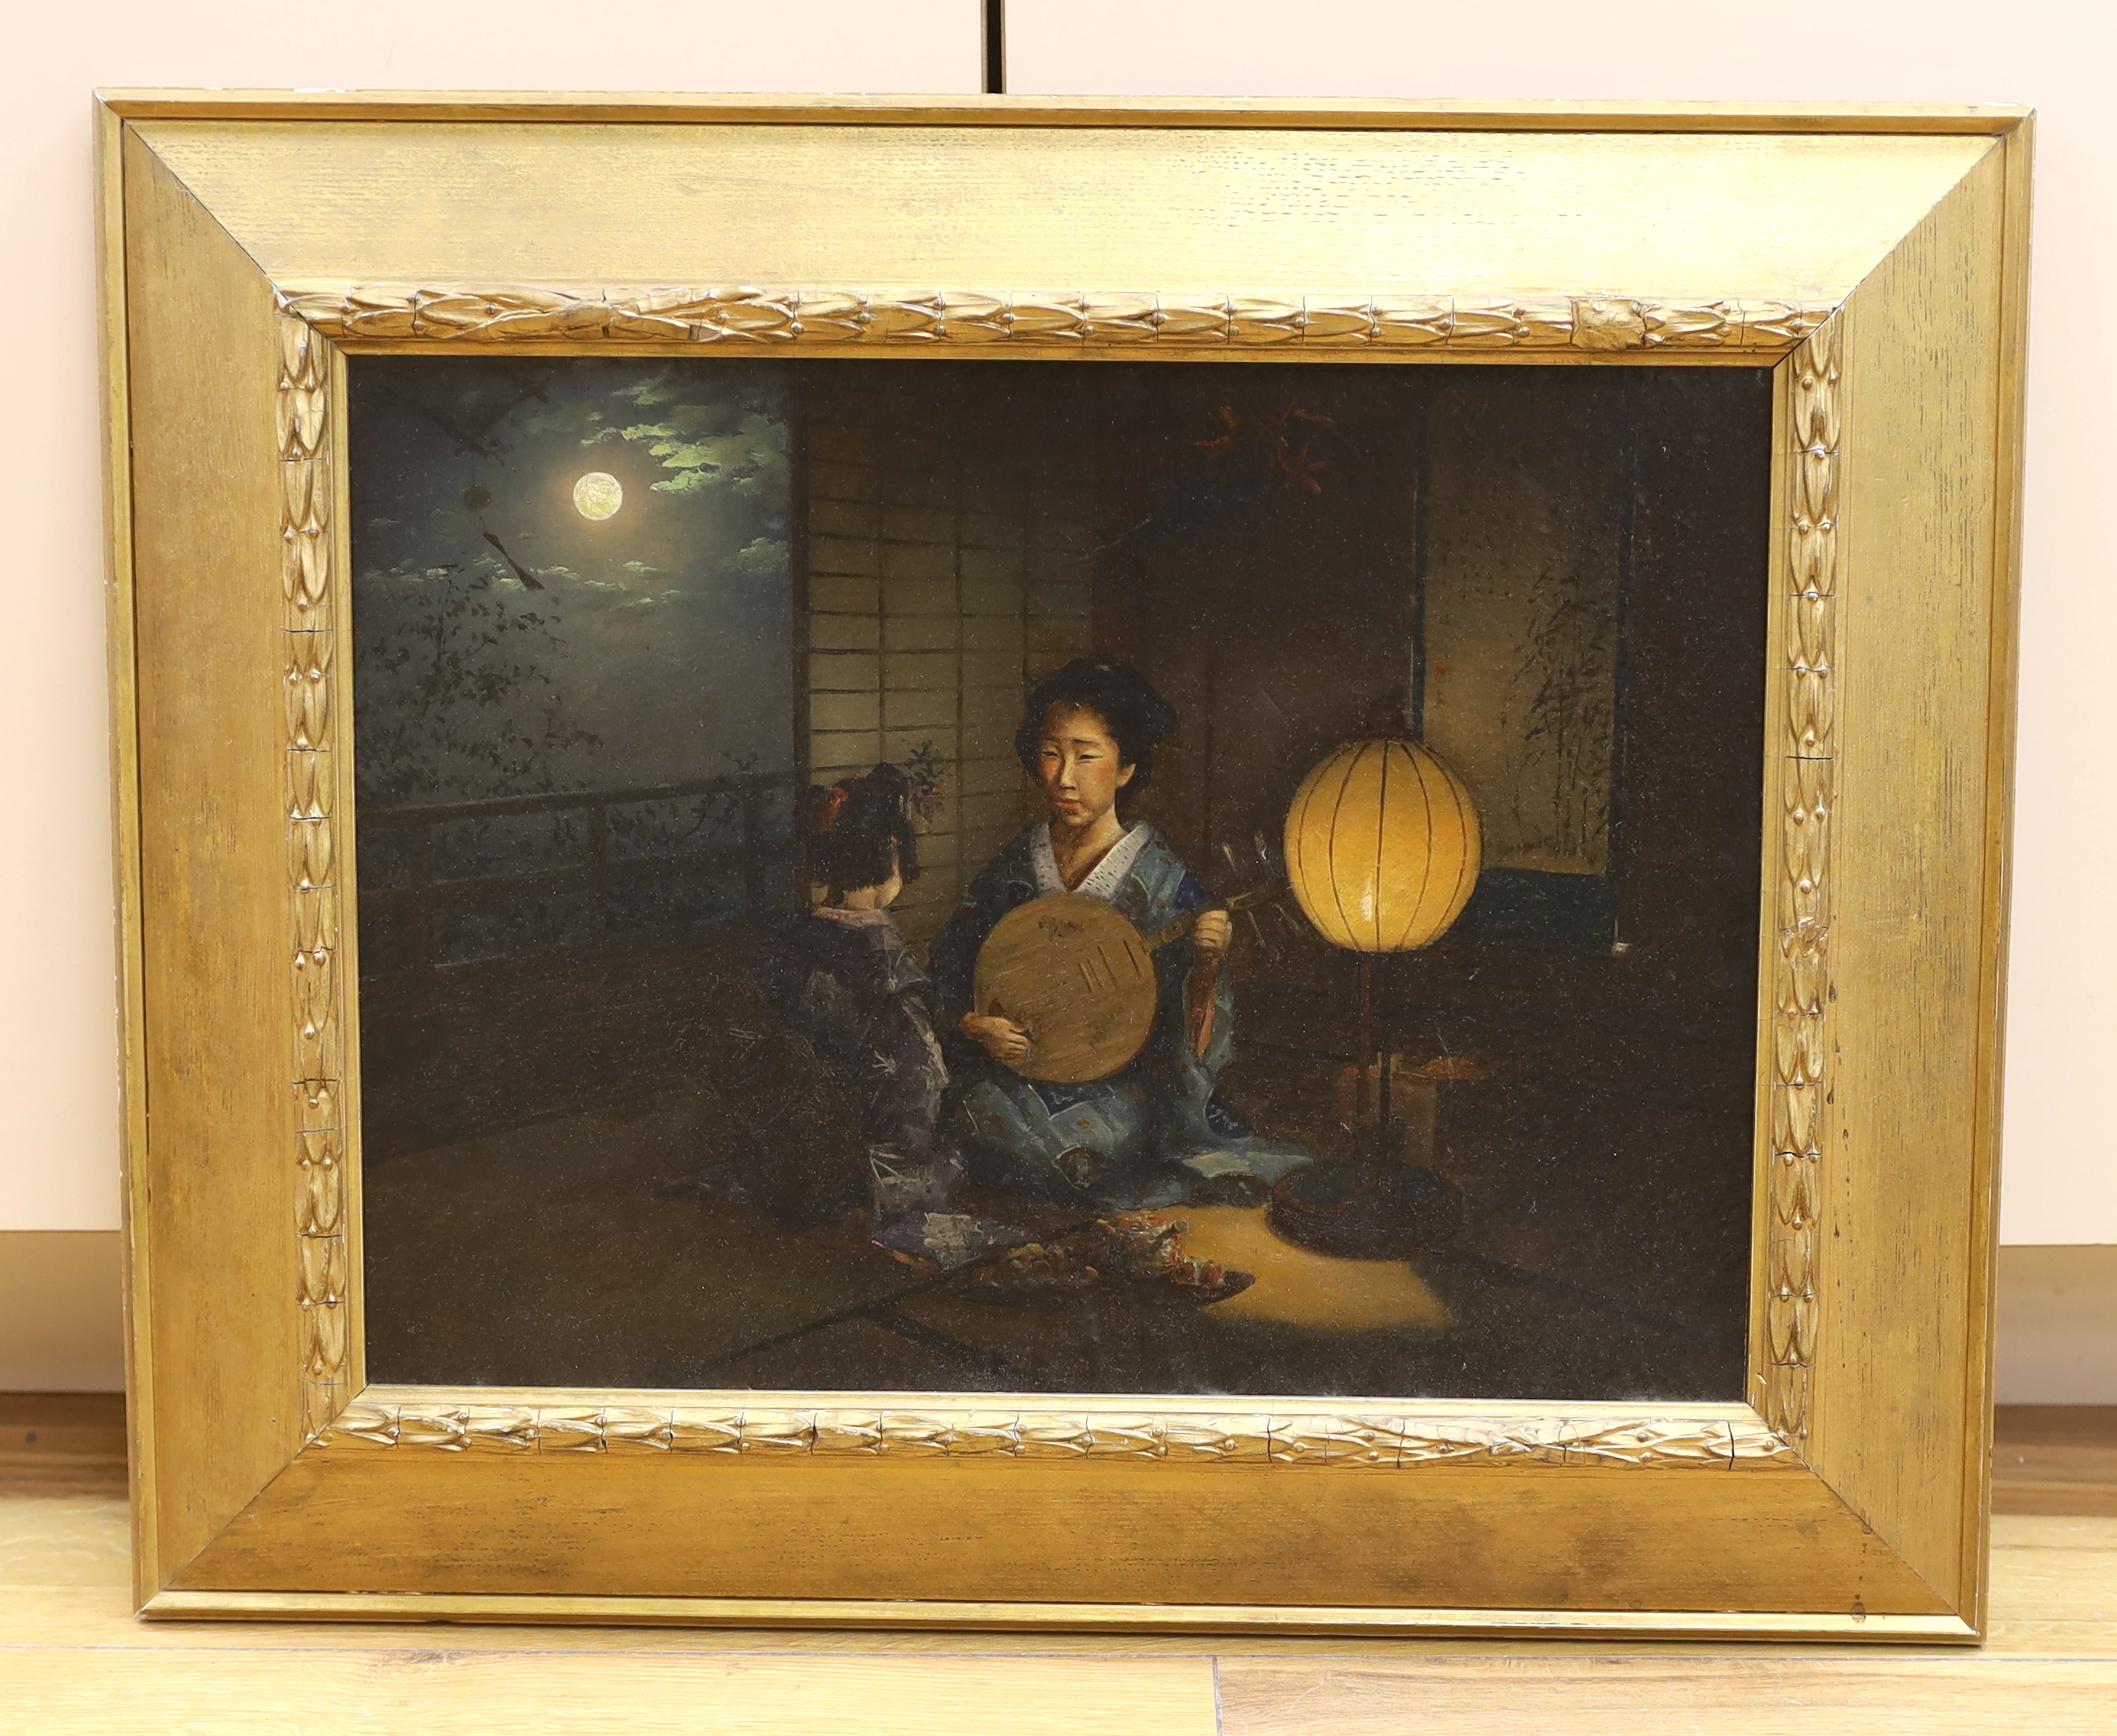 19th century English School, oil on canvas, Japanese interior with women, one playing a Biwa, pencil inscription verso, 